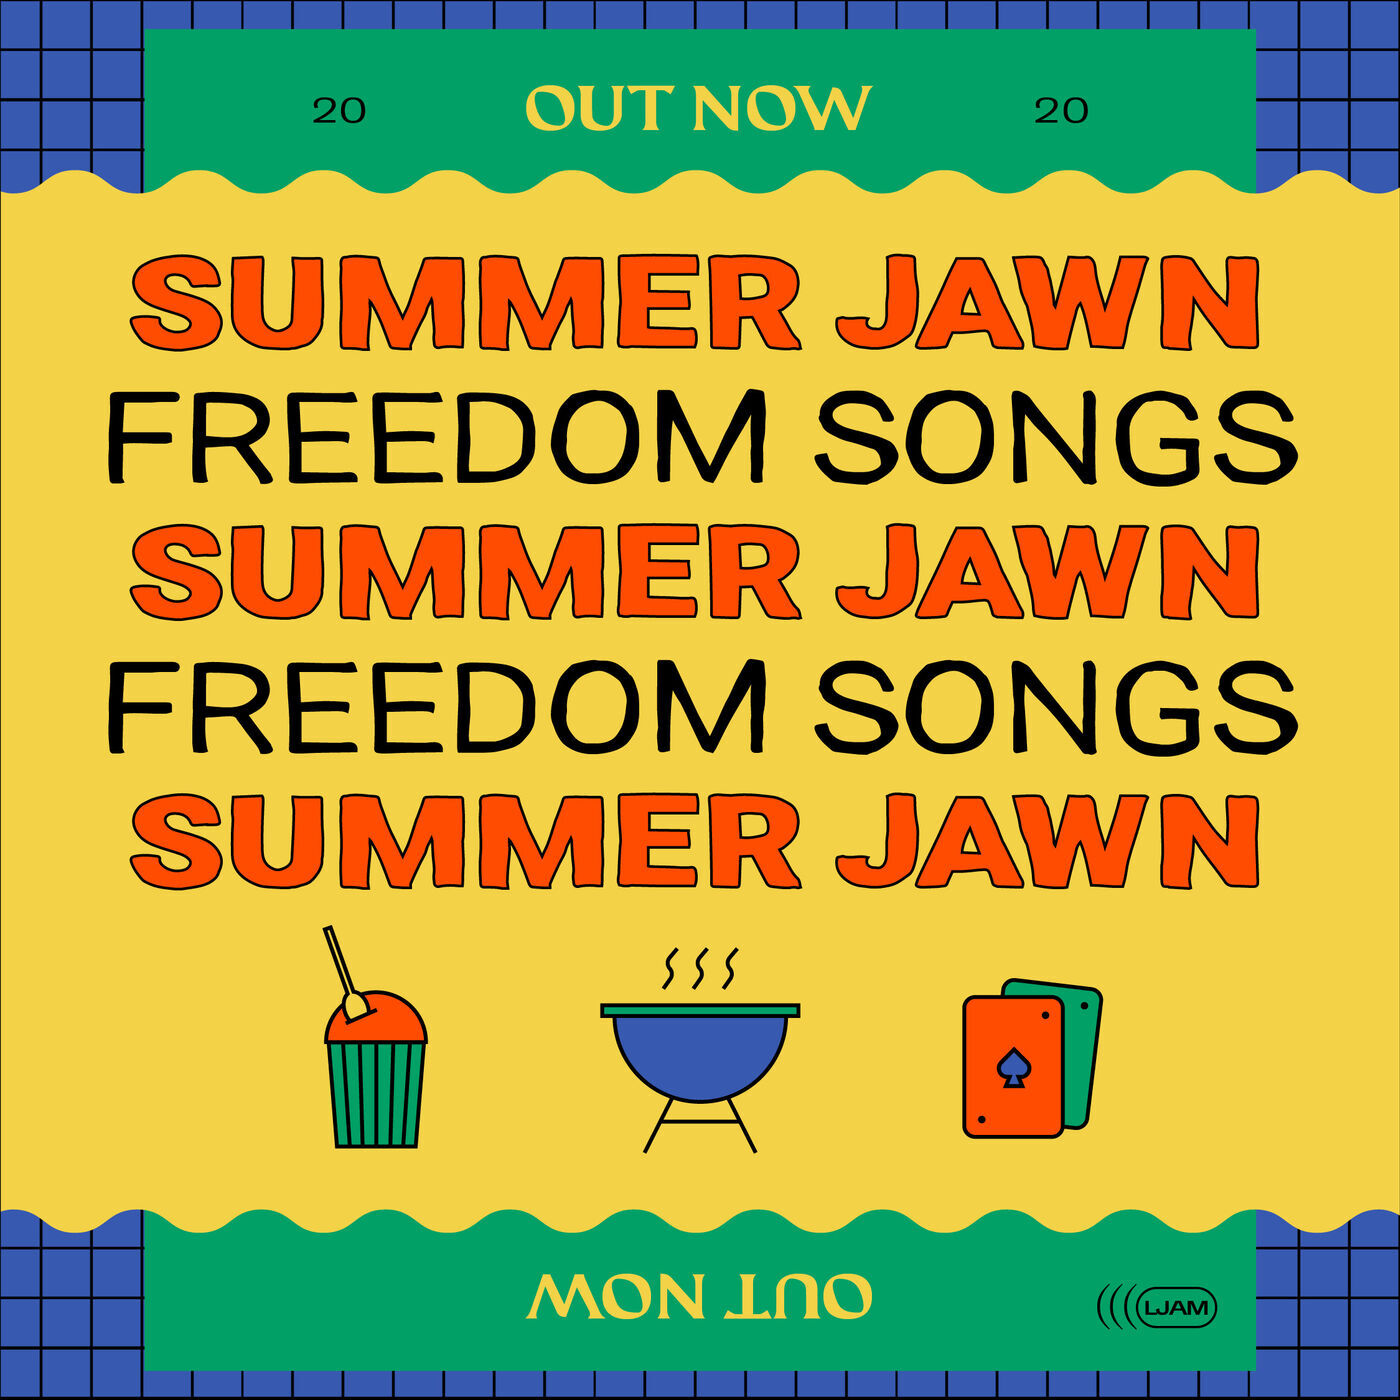 a love jawns playlist cover that says "Summer Jawn Freedom Songs"